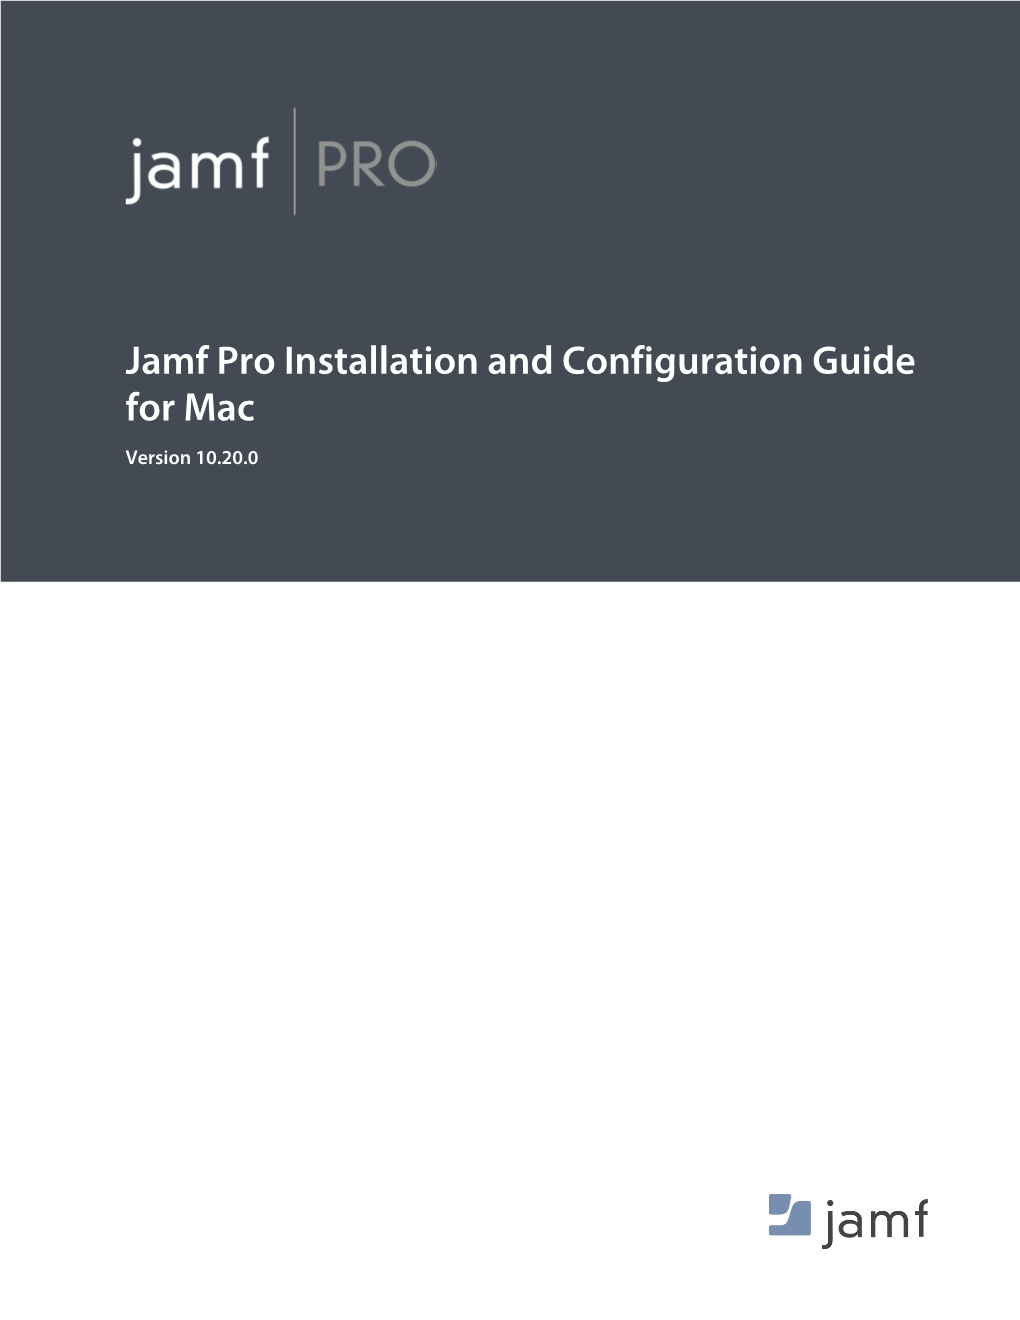 Jamf Pro Installation and Configuration Guide for Mac Version 10.20.0 © Copyright 2002-2020 Jamf